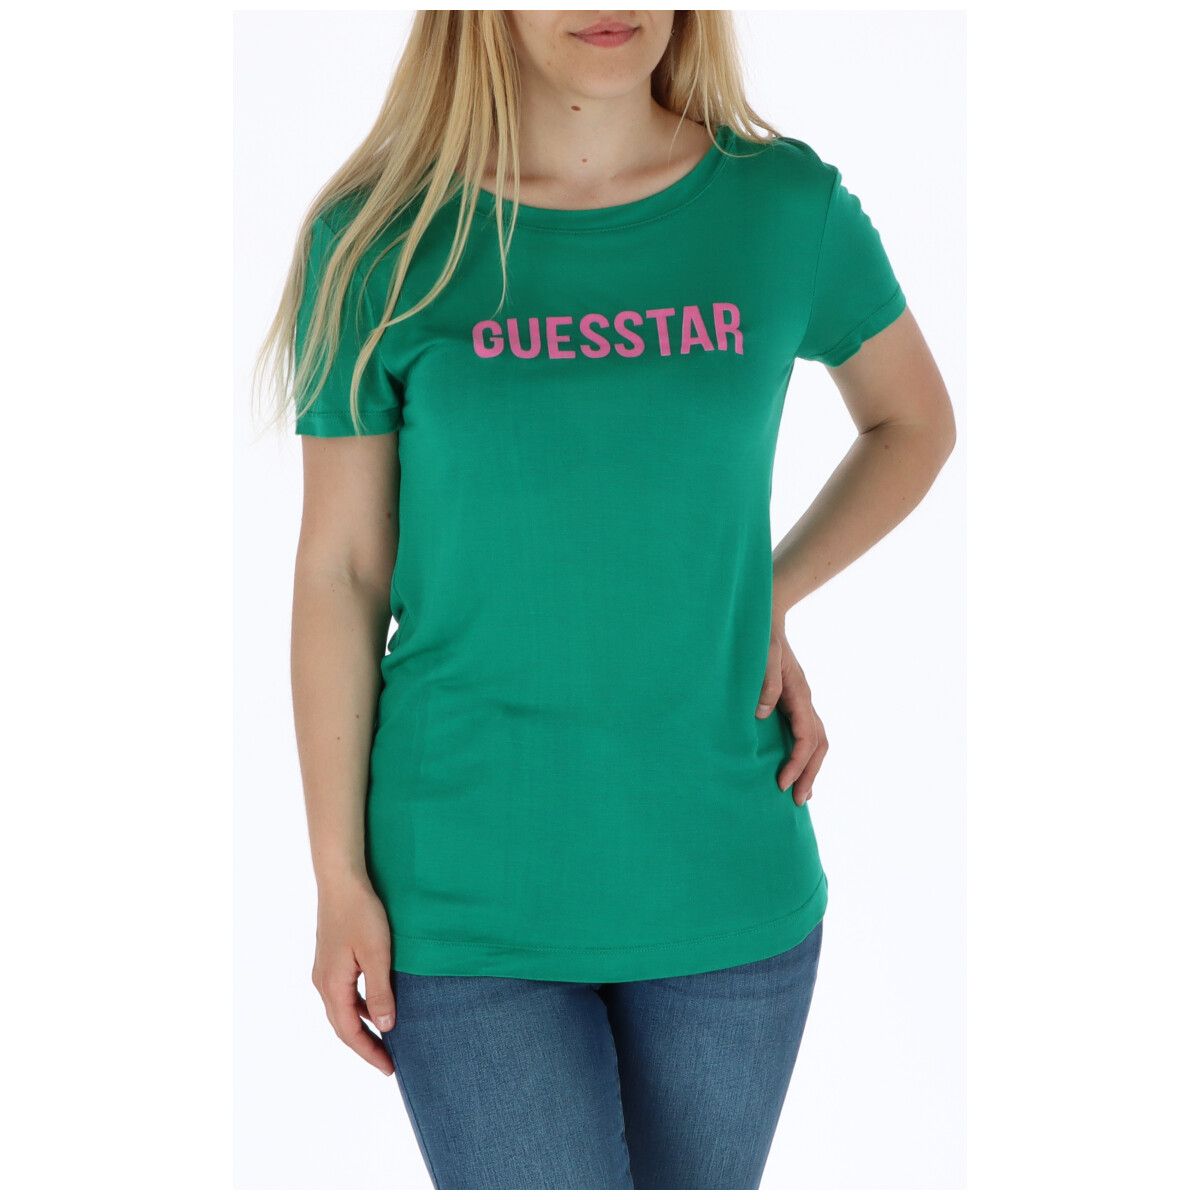 Brand: Guess
Gender: Women
Type: T-shirts
Season: Spring/Summer

PRODUCT DETAIL
• Color: green
• Pattern: print
• Sleeves: short
• Neckline: round neck
•  Article code: W83I12K7DM0

COMPOSITION AND MATERIAL
• Composition: -100% viscose 
•  Washing: machine wash at 30°